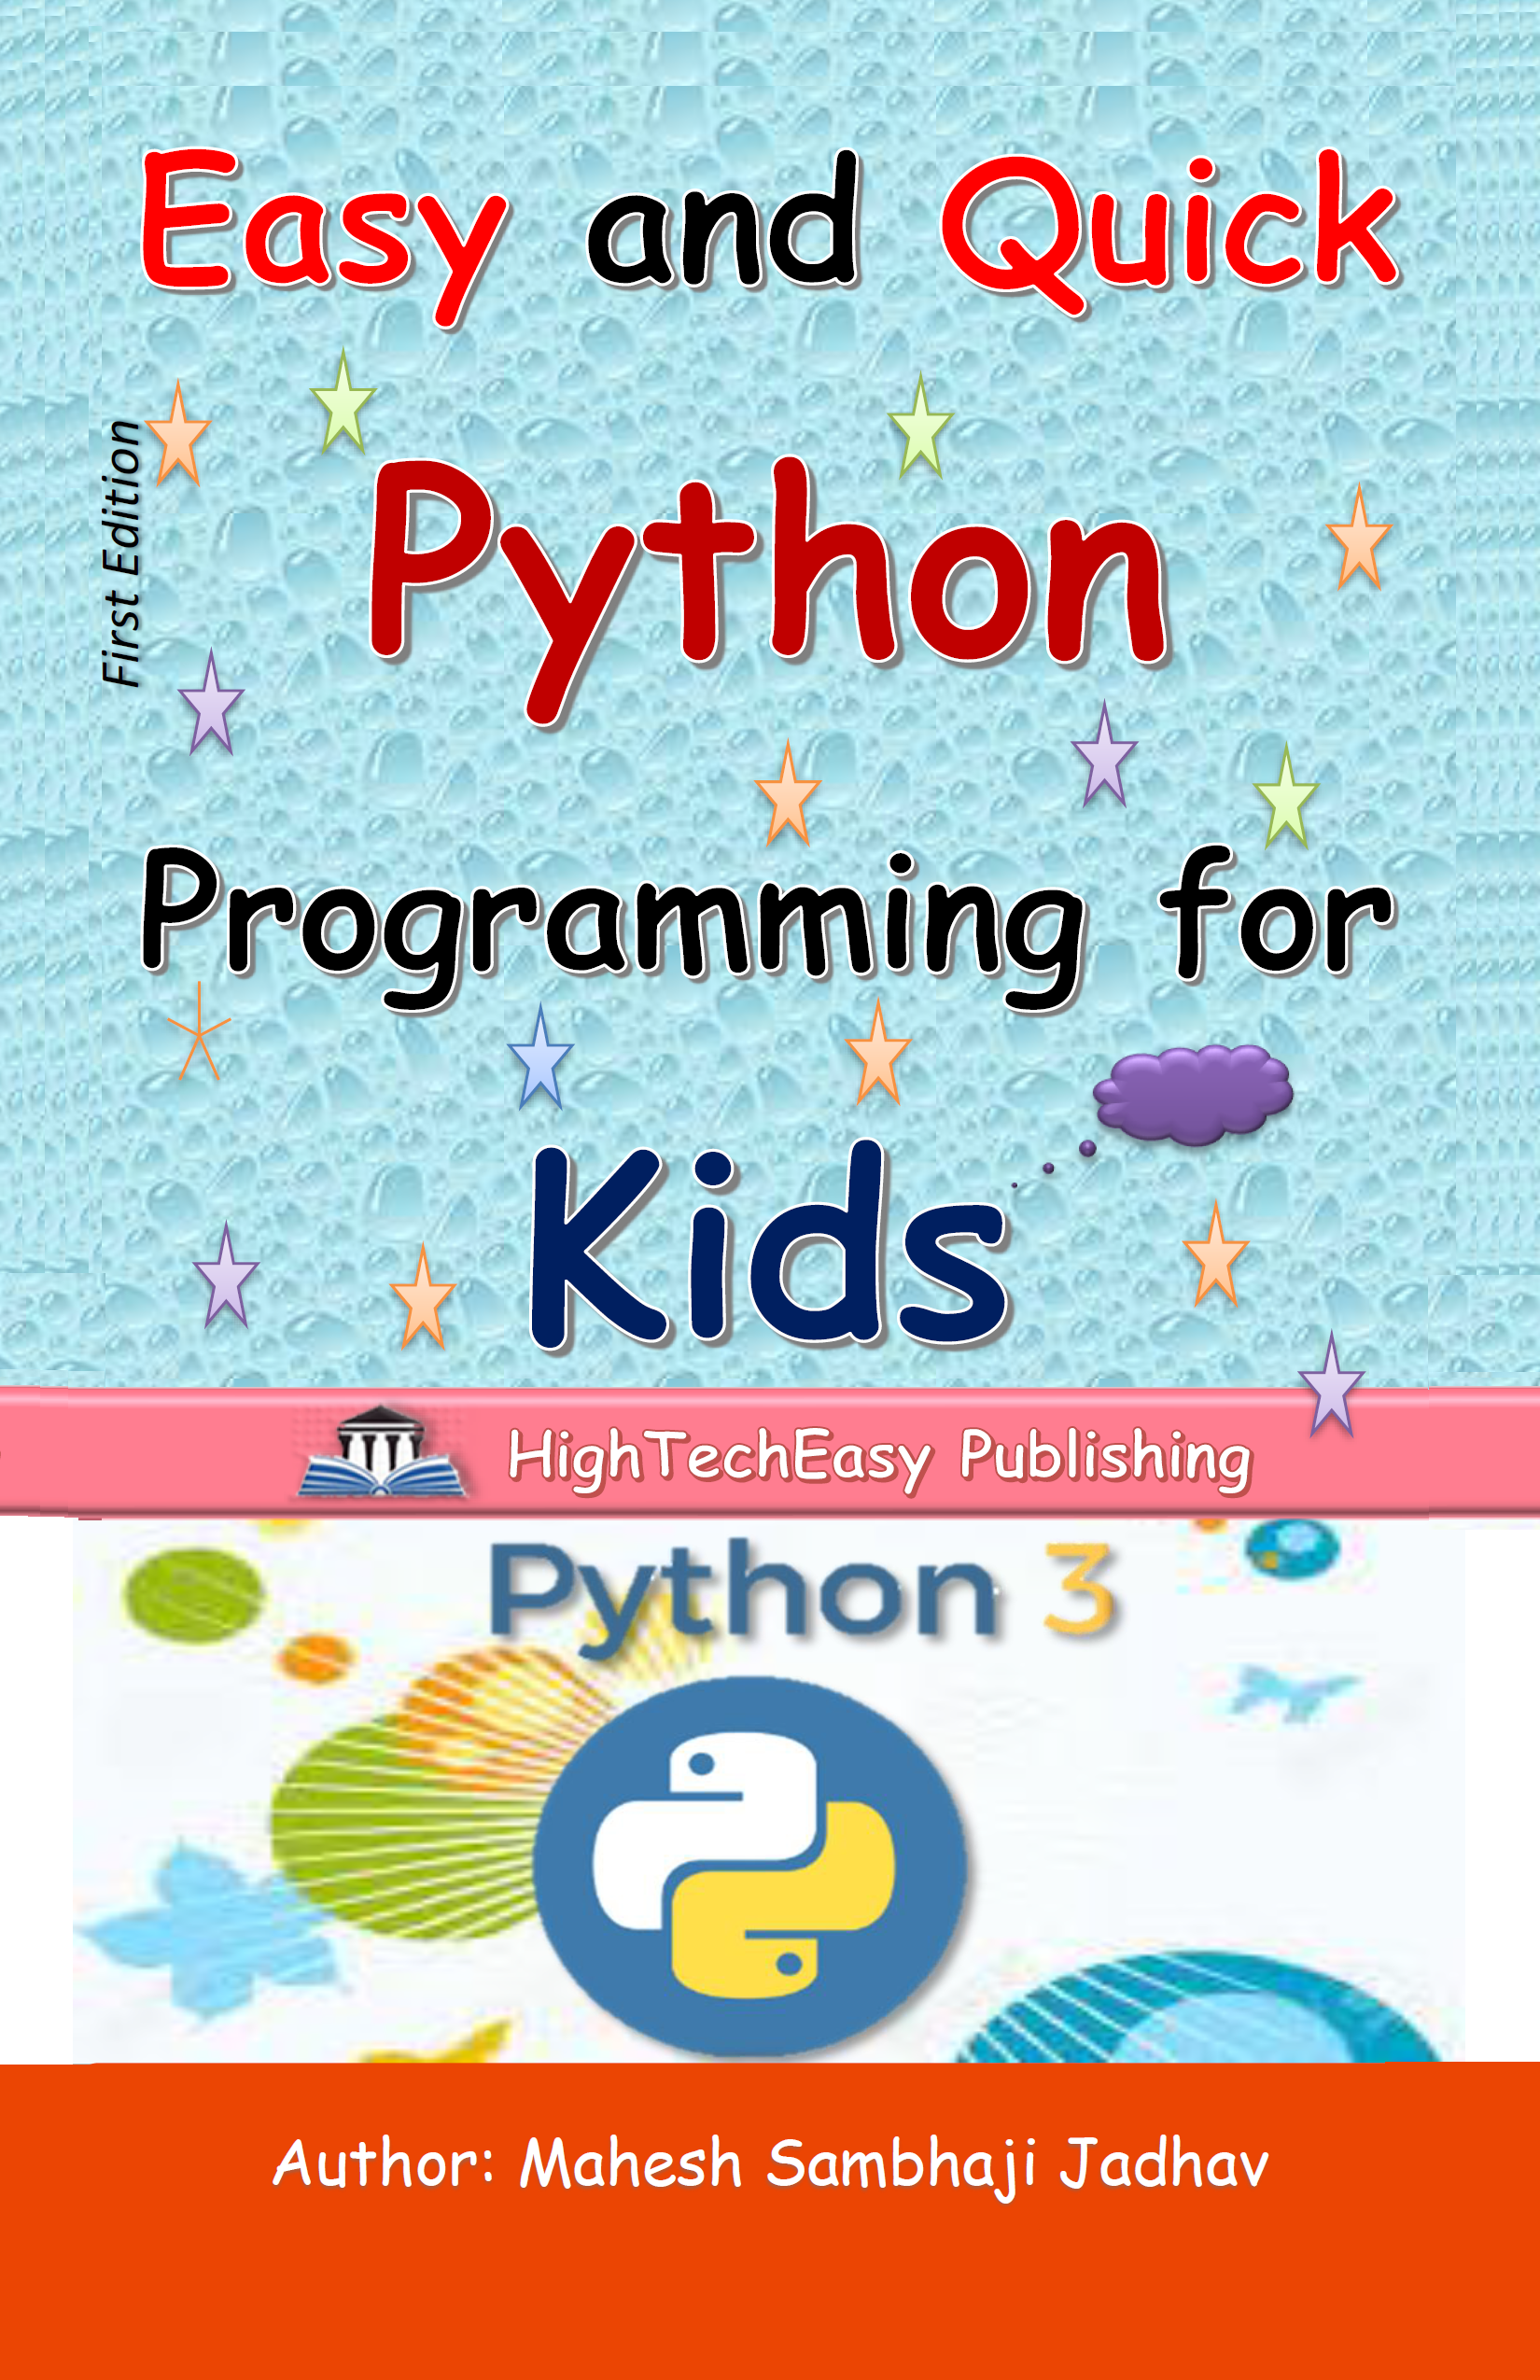 Easy and Quick Python Programming for Kids